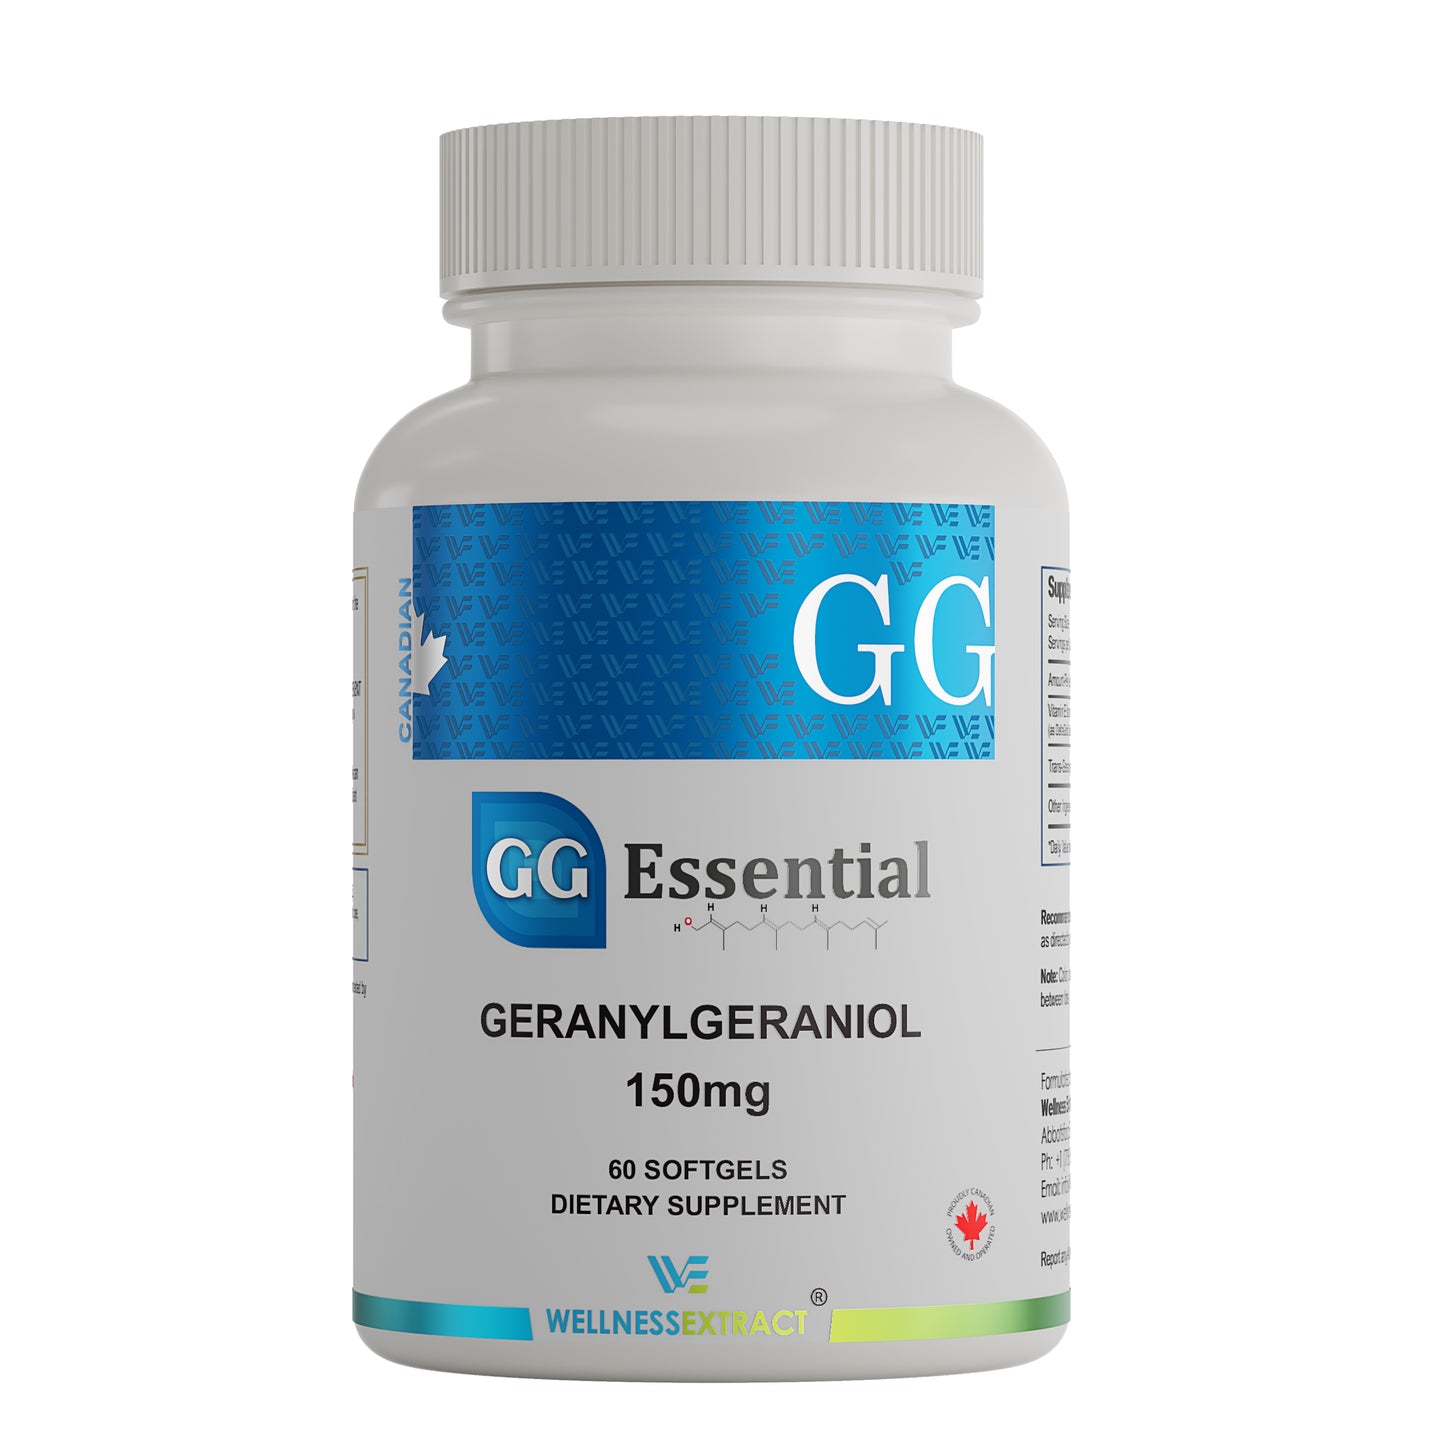 GG-Essential | Annatto Plant-derived Dietary Supplement | 150mg 60 softgels